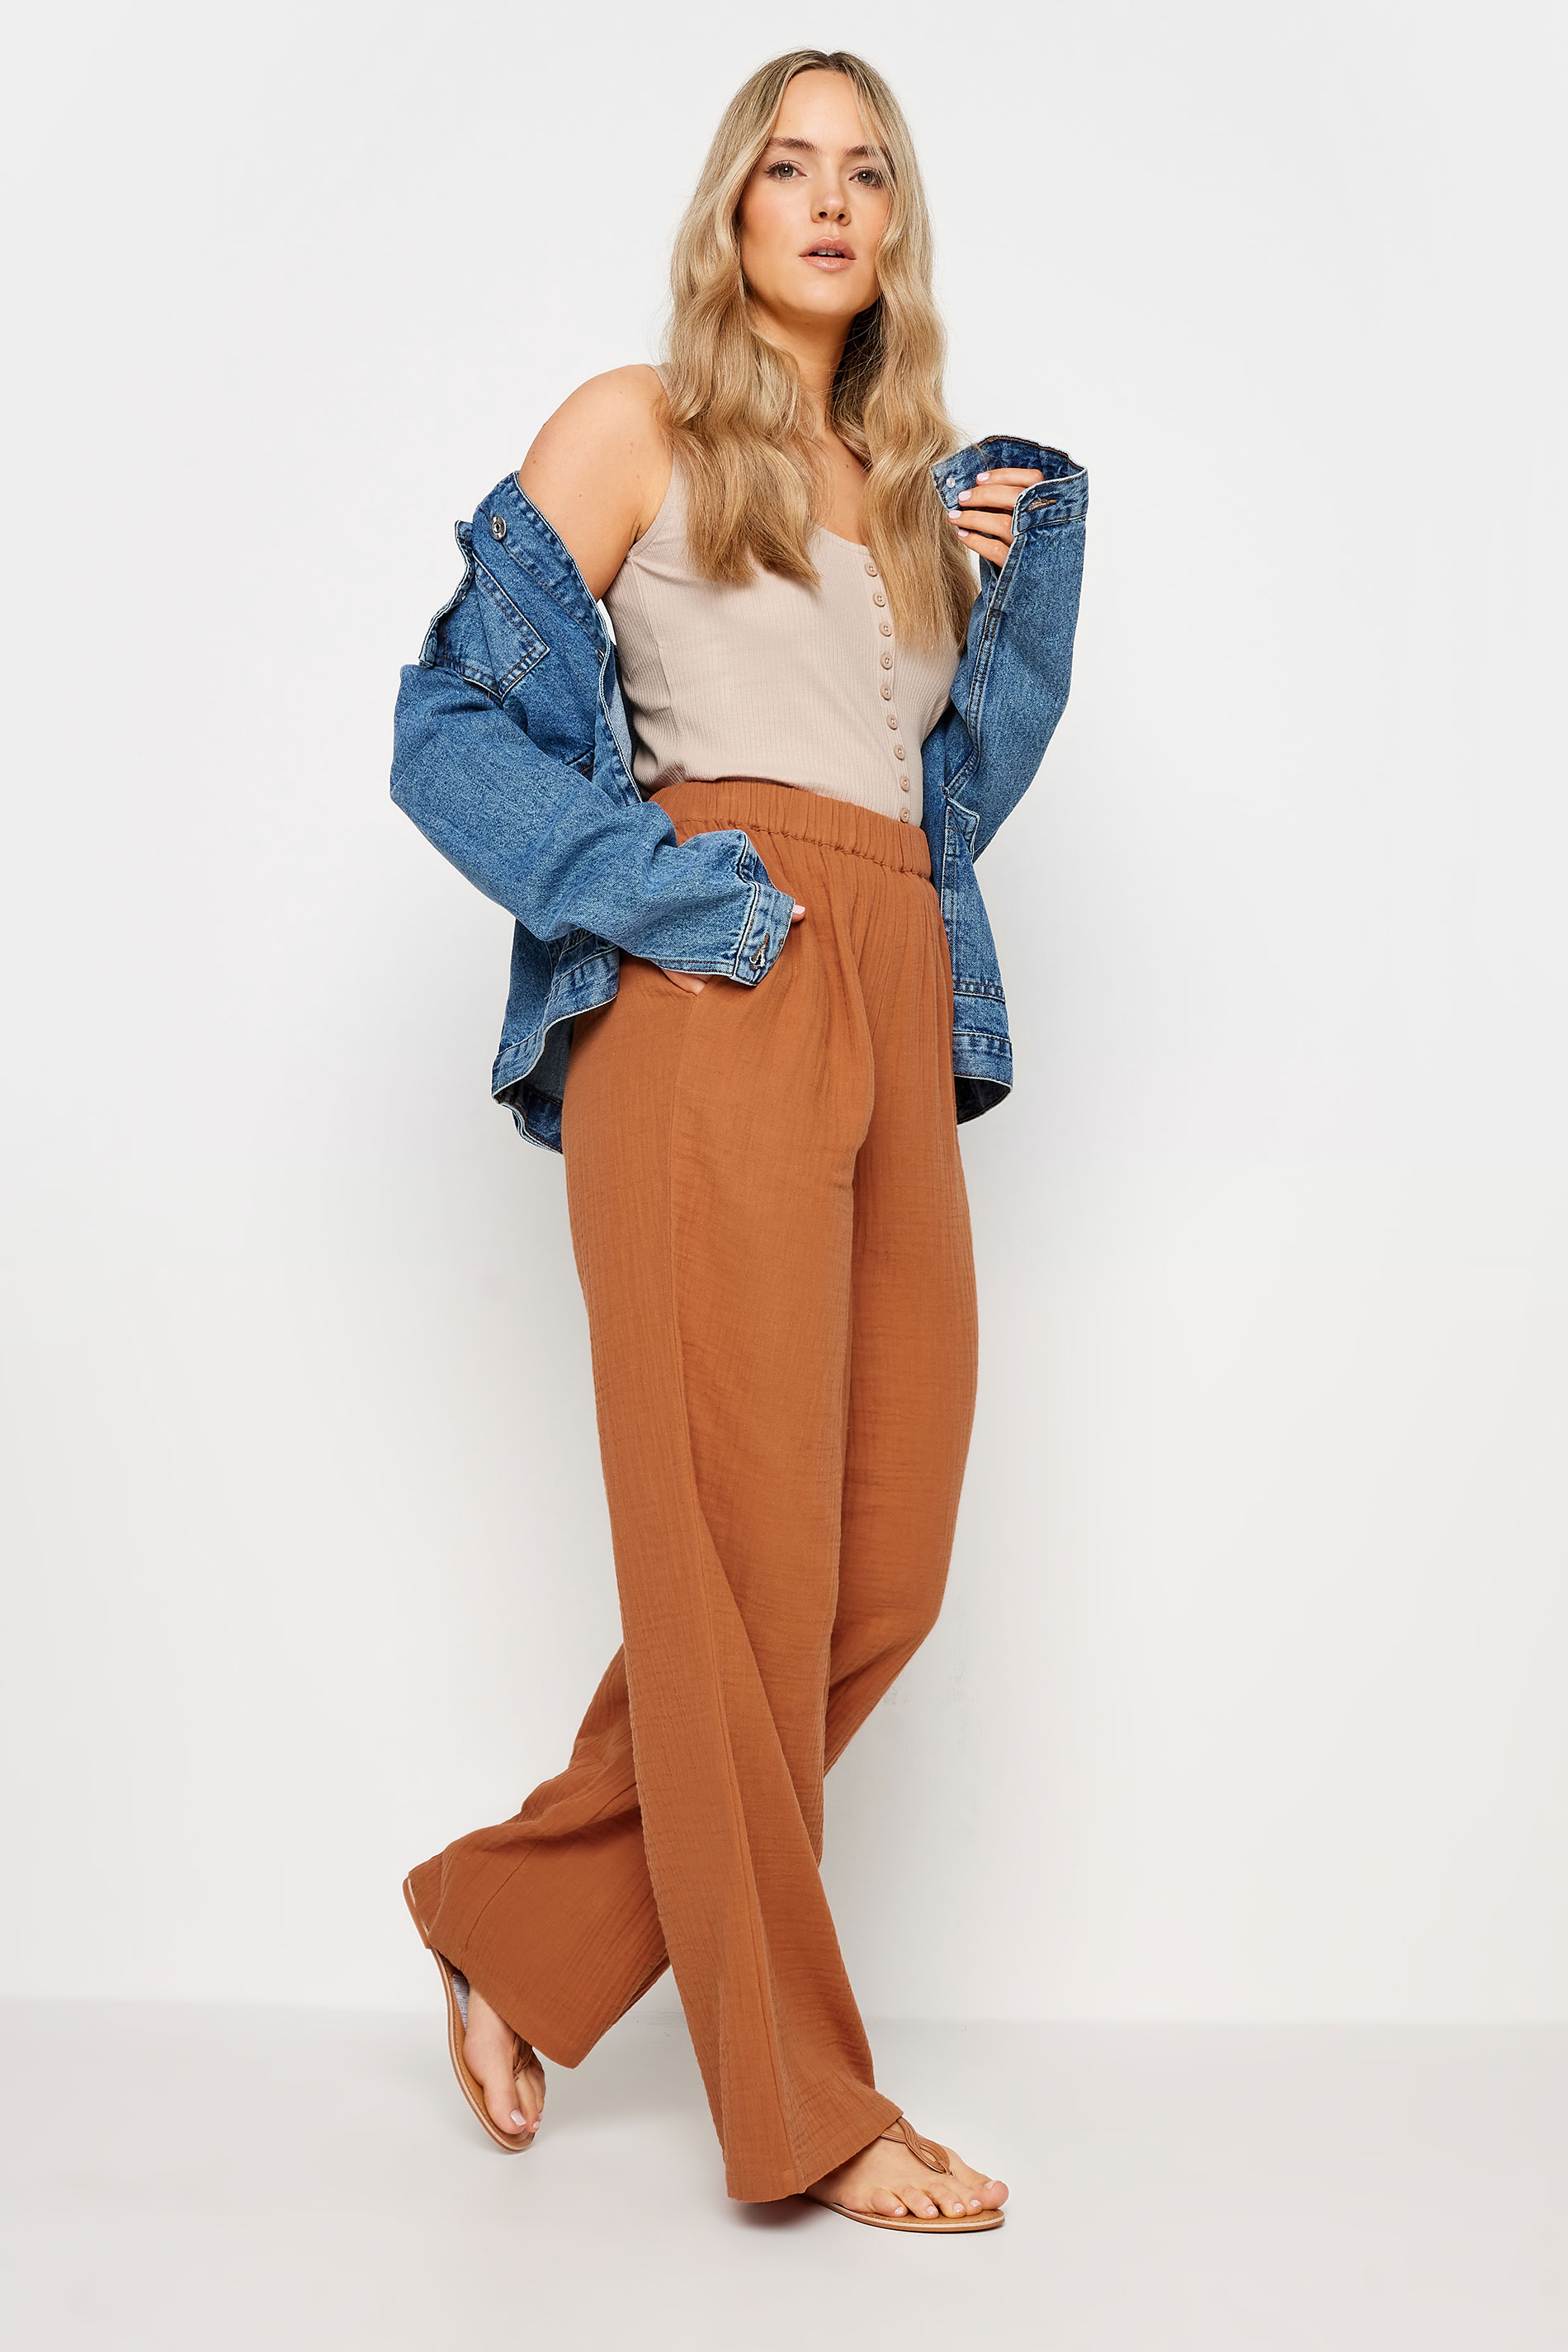 LTS Tall Women's Rust Orange Cheesecloth Wide Leg Trousers | Long Tall Sally 2